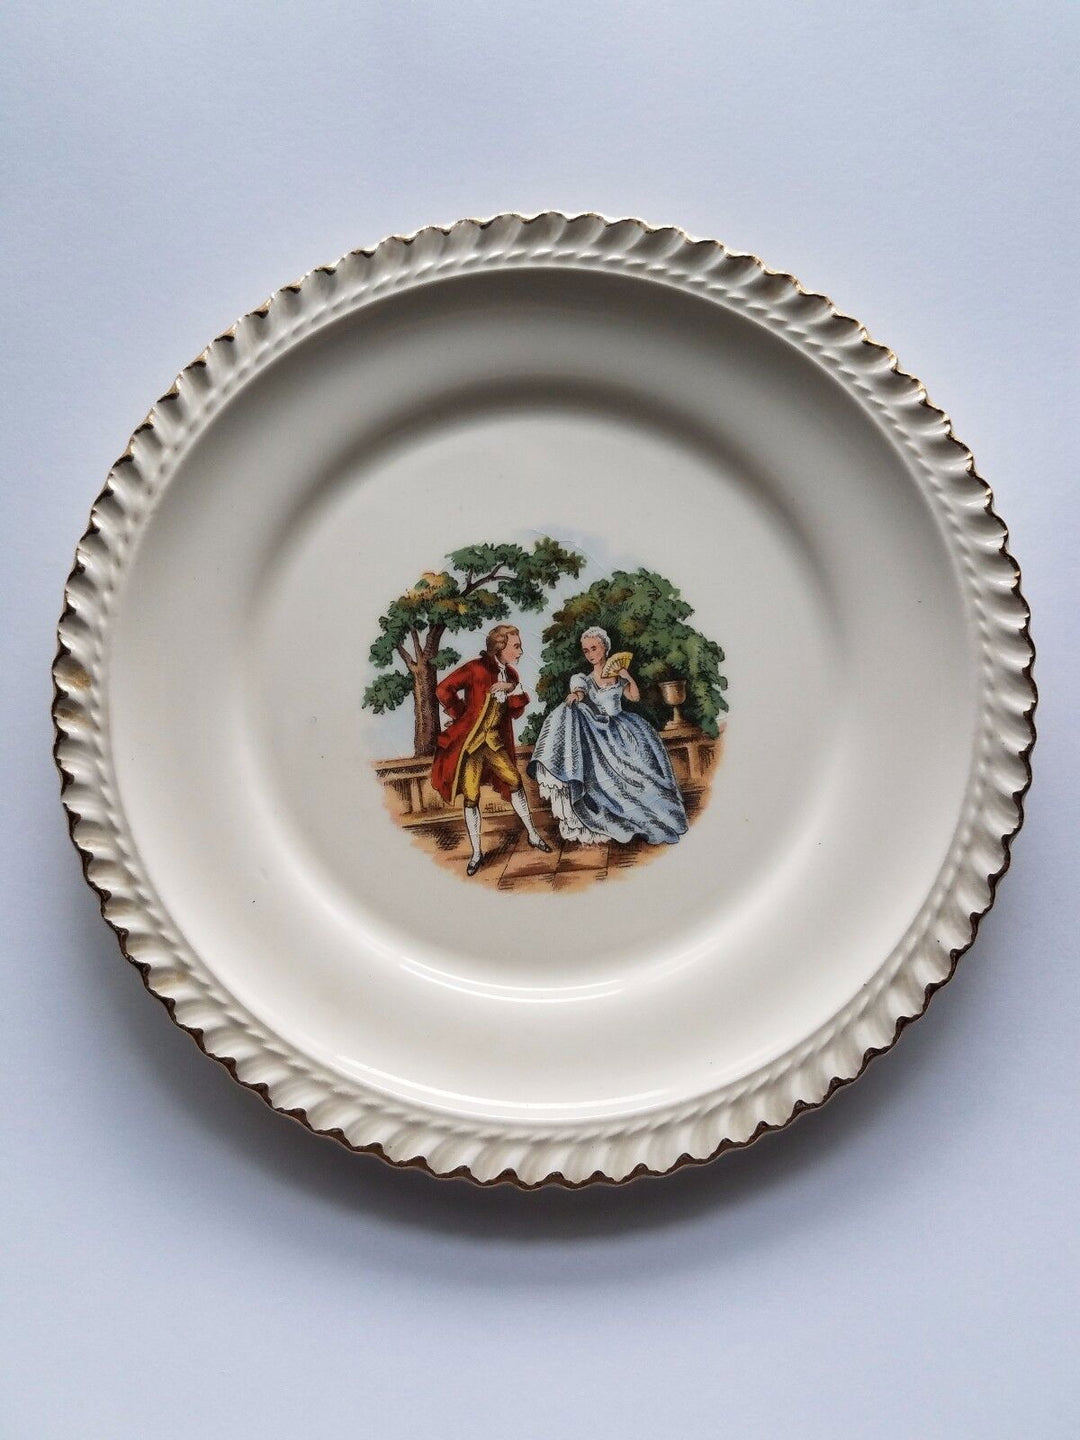 Vintage Harker Pottery 6 1/4" Courting Couple Plates. 22k Gold Trim. Set of 6. - The Kennedy Collective Thrift - 